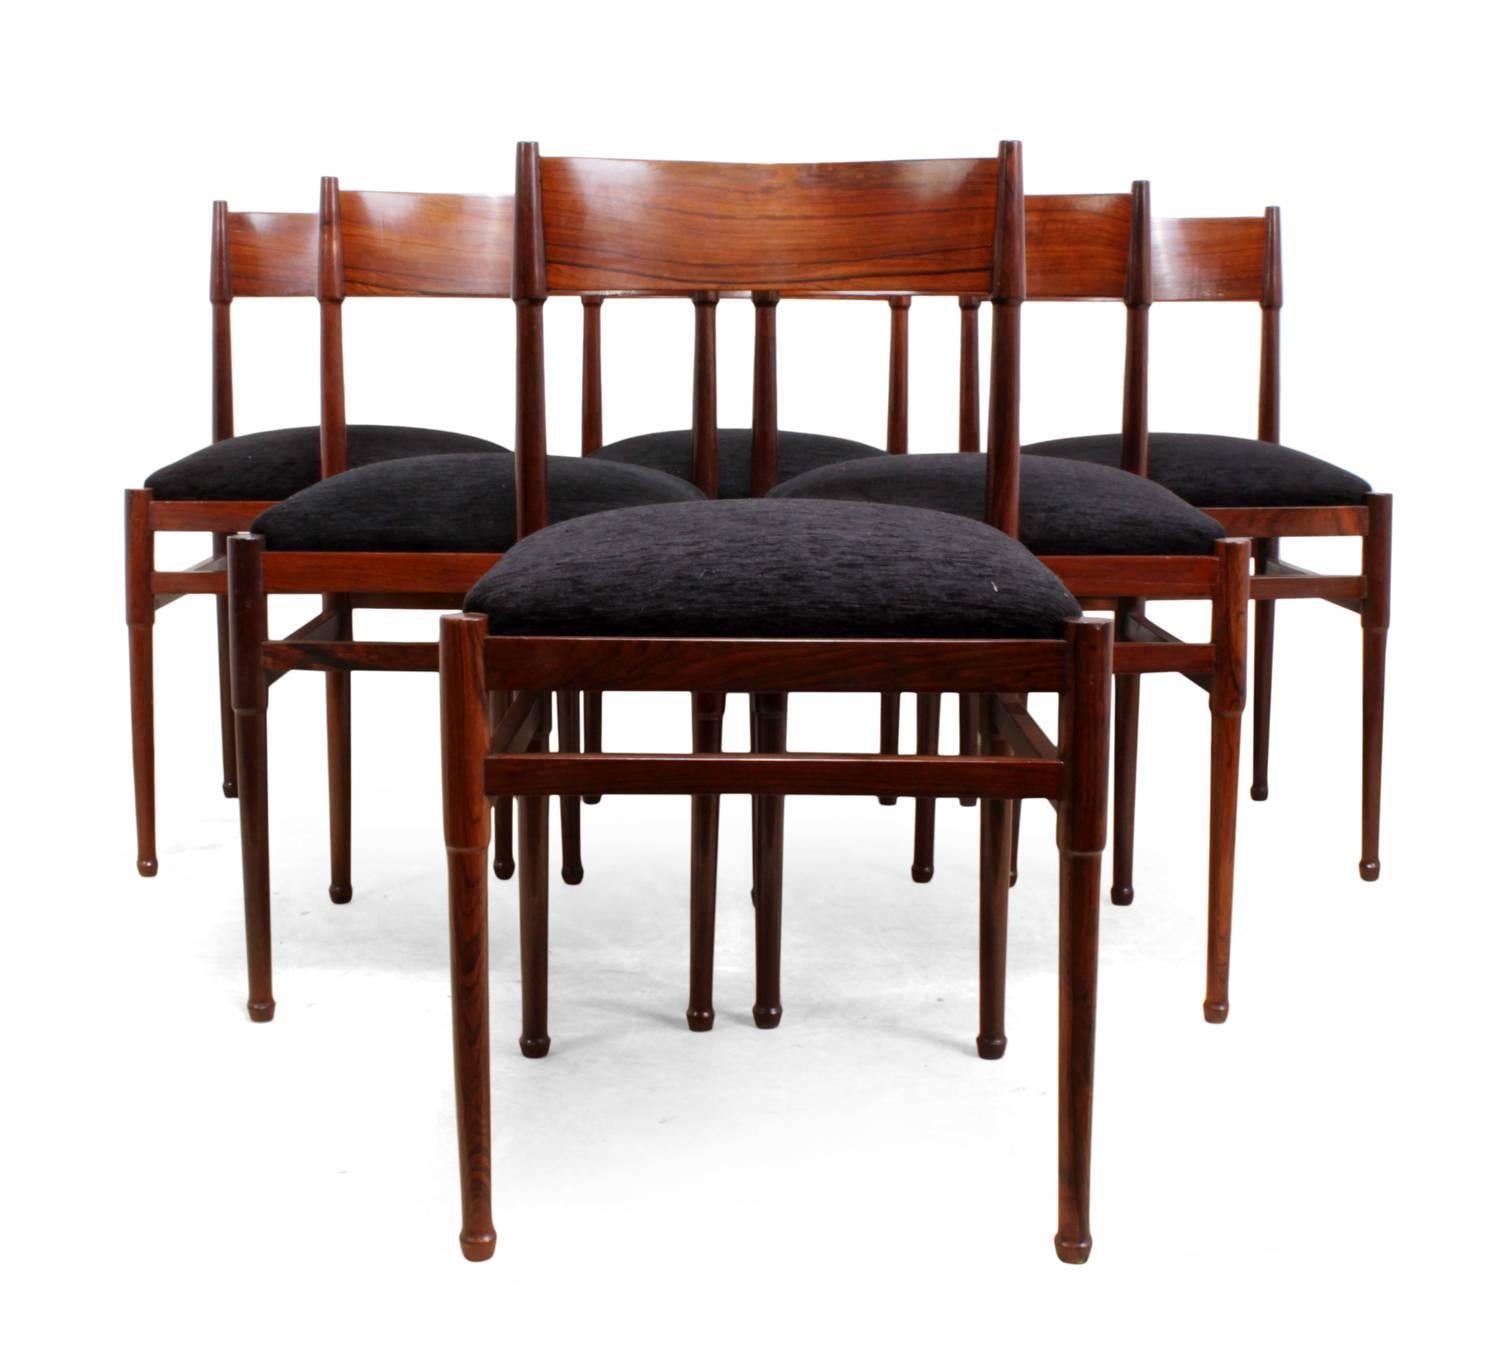 Midcentury Italian dining table and six chairs in rosewood
A lovely quality midcentury Italian produced ding suite consisting of a dining table with butterfly leaf and six chairs, the suite has been fully restored so no lose joints and all has been